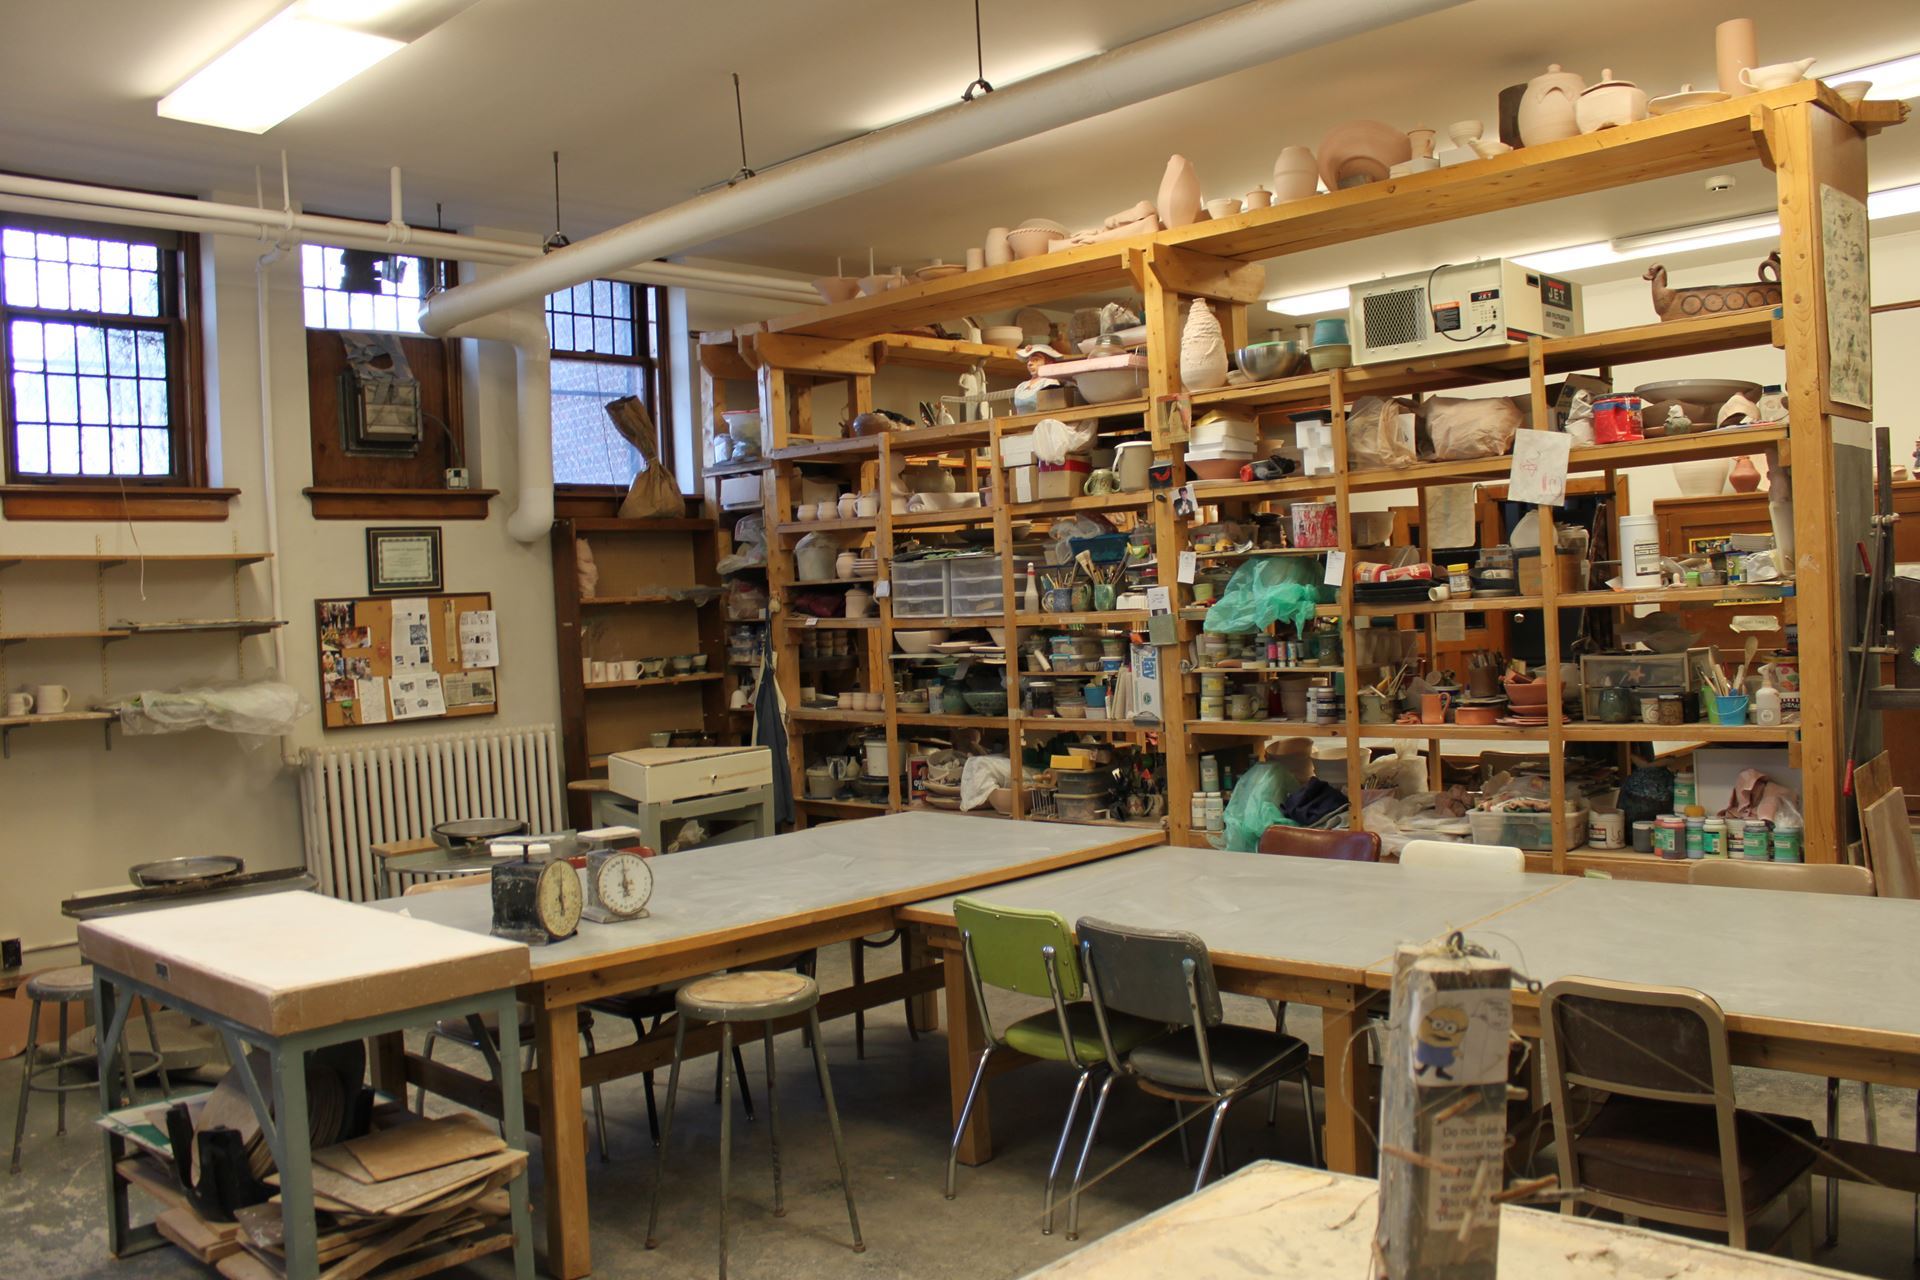 The DAI Ceramics Studio space with shelving and work tables